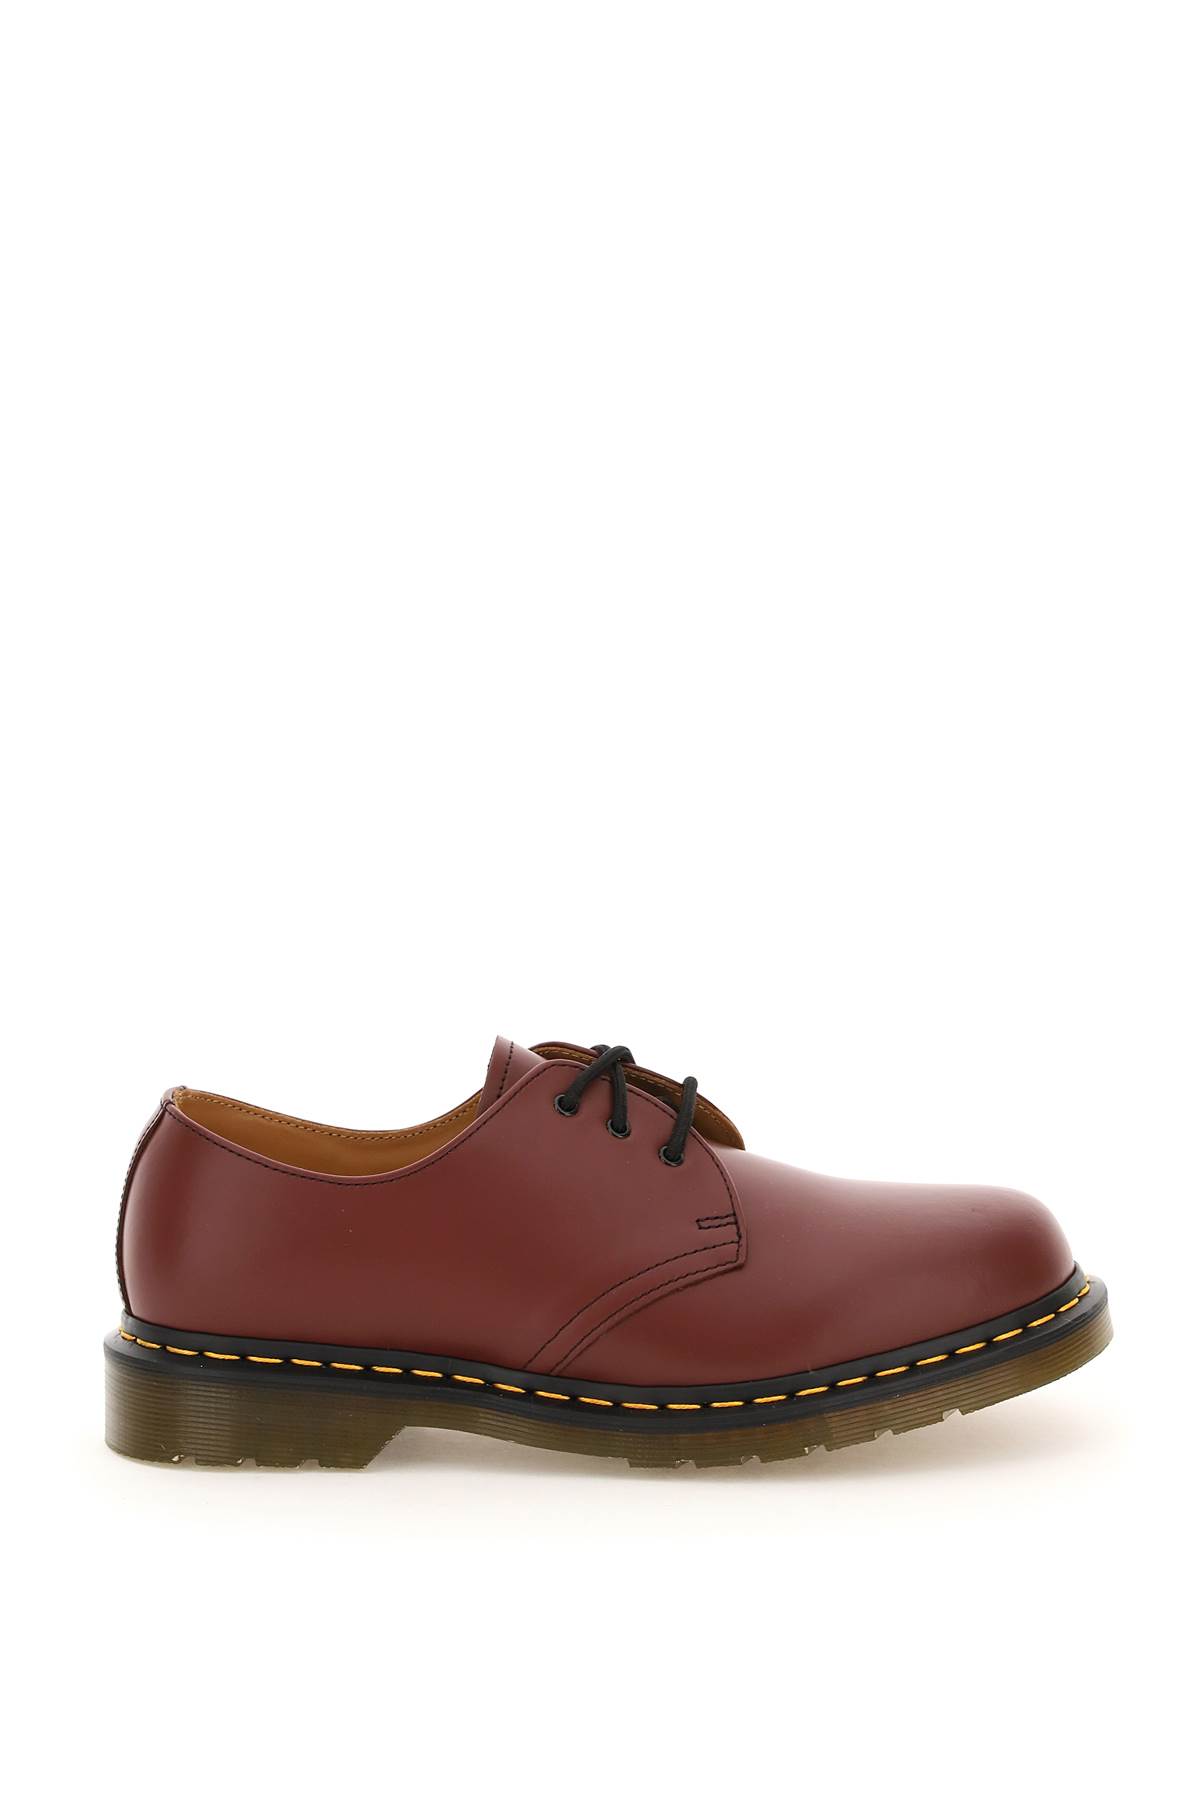 Dr. Martens 1461 Smooth Lace-up Shoes